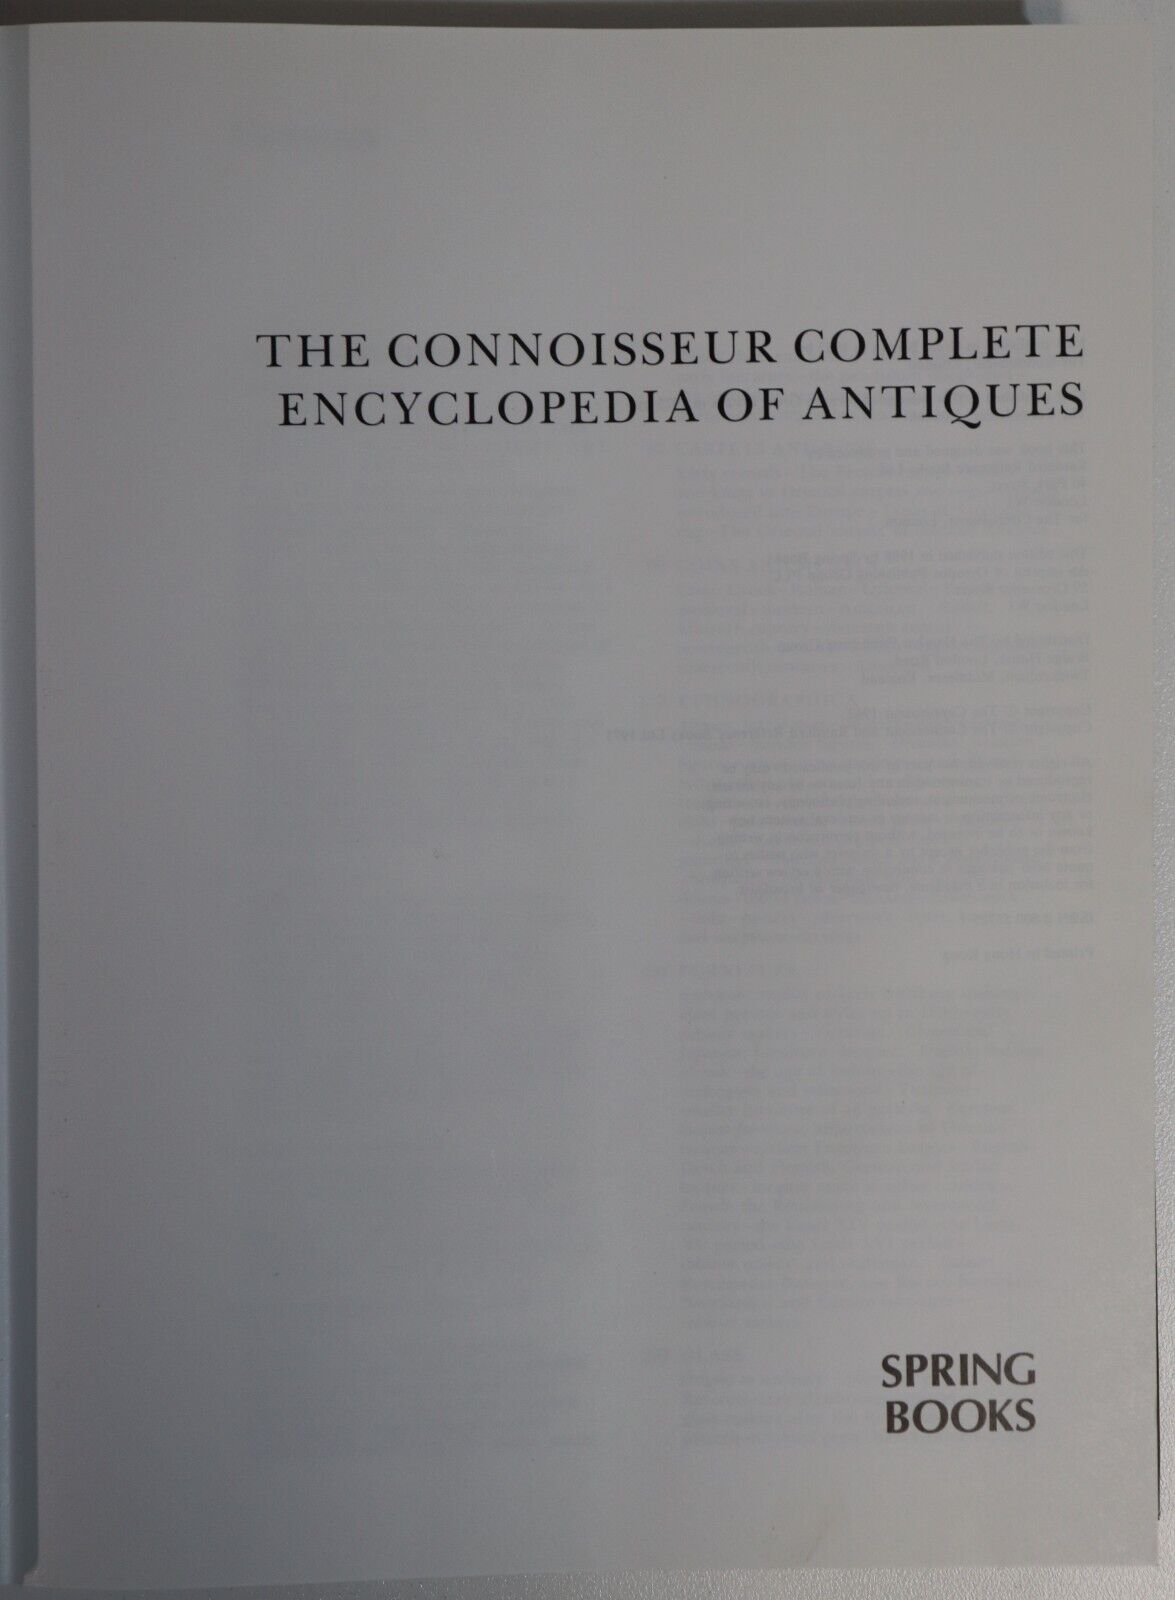 The Connoisseur Encyclopedia Of Antiques - 1988 - Antiques Reference Book